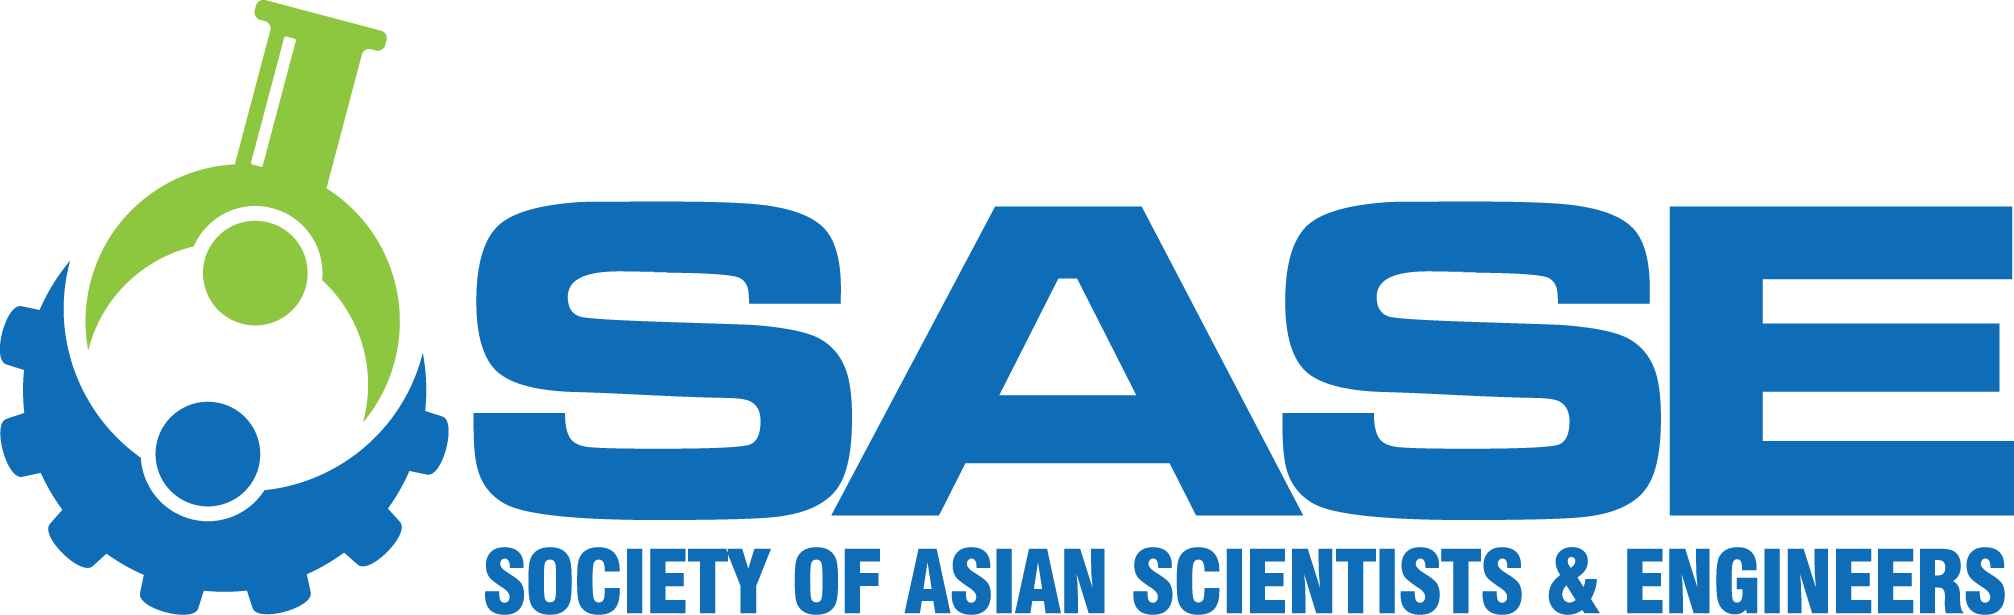 Society of Asian Scientists and Engineers Logo